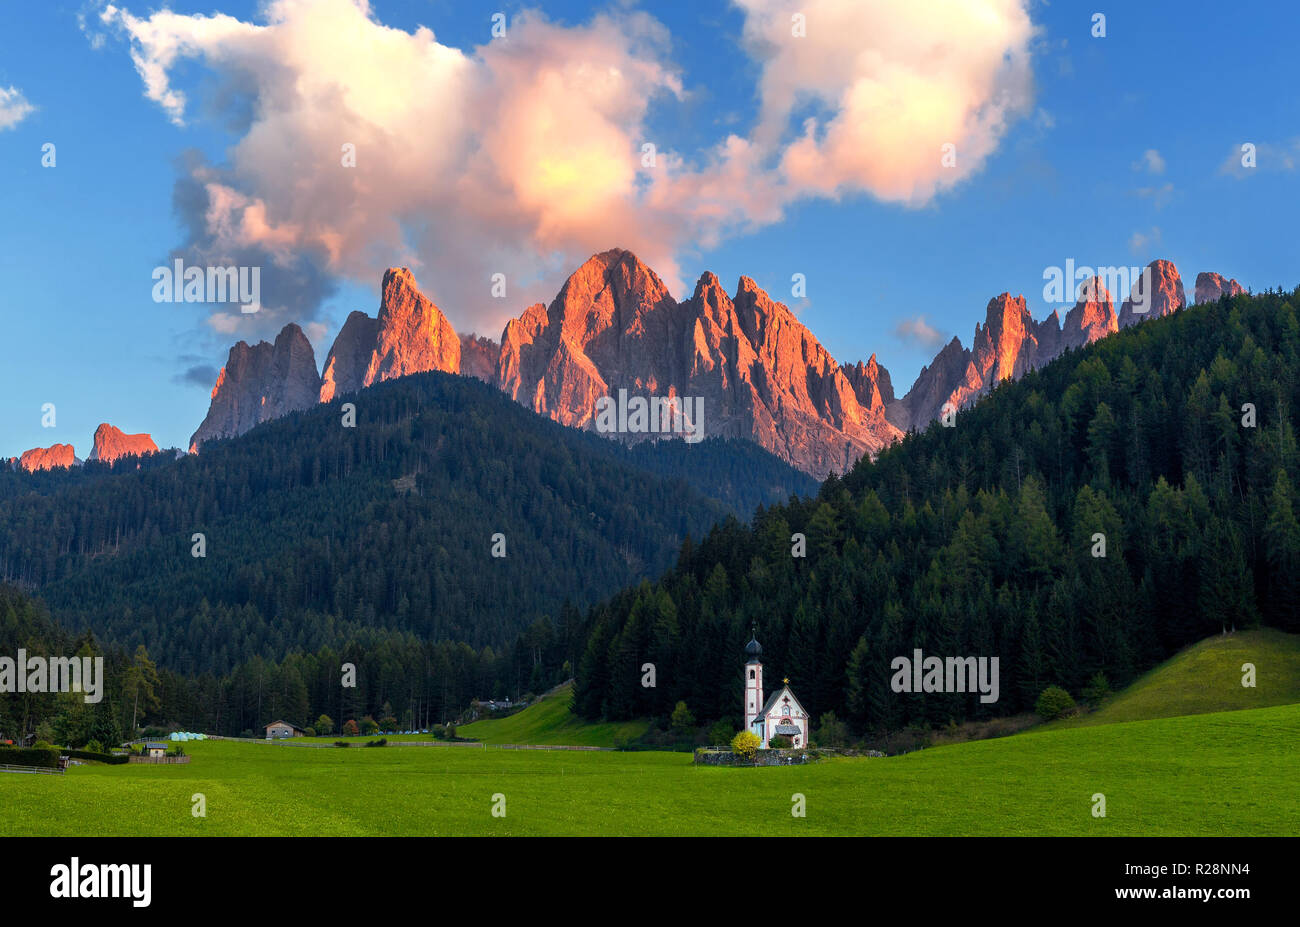 St. Johann (San Giovanni in Italian) chapel in Val di Funes with the Dolomites Odle group on background. Northern Italy. Stock Photo